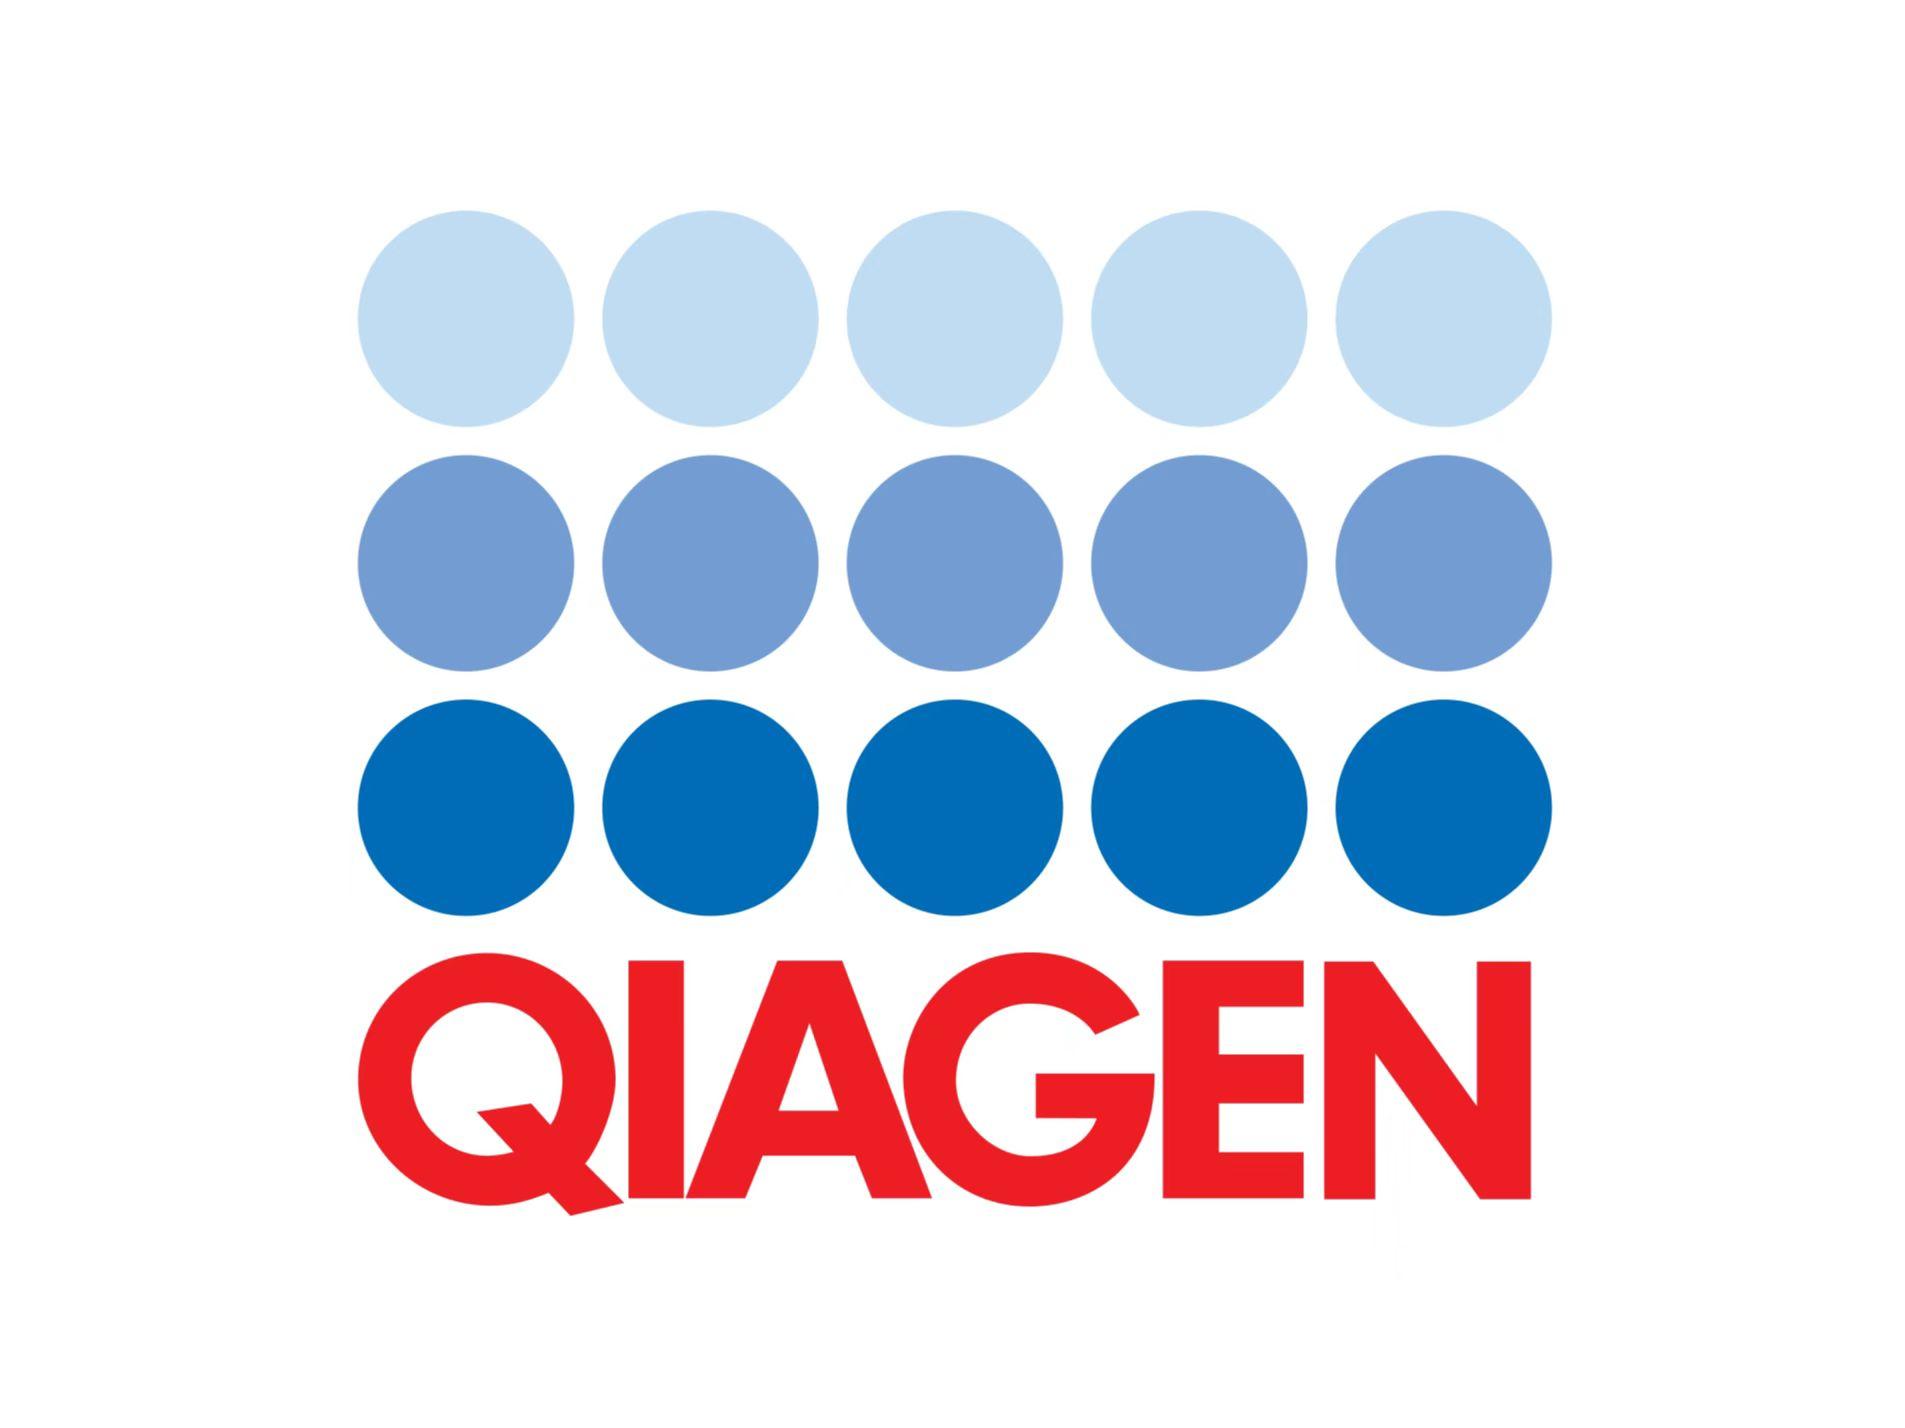 QIAGEN launches new QIAcuity digital PCR assays for microbial applications, enhancing infectious disease research and surveillance